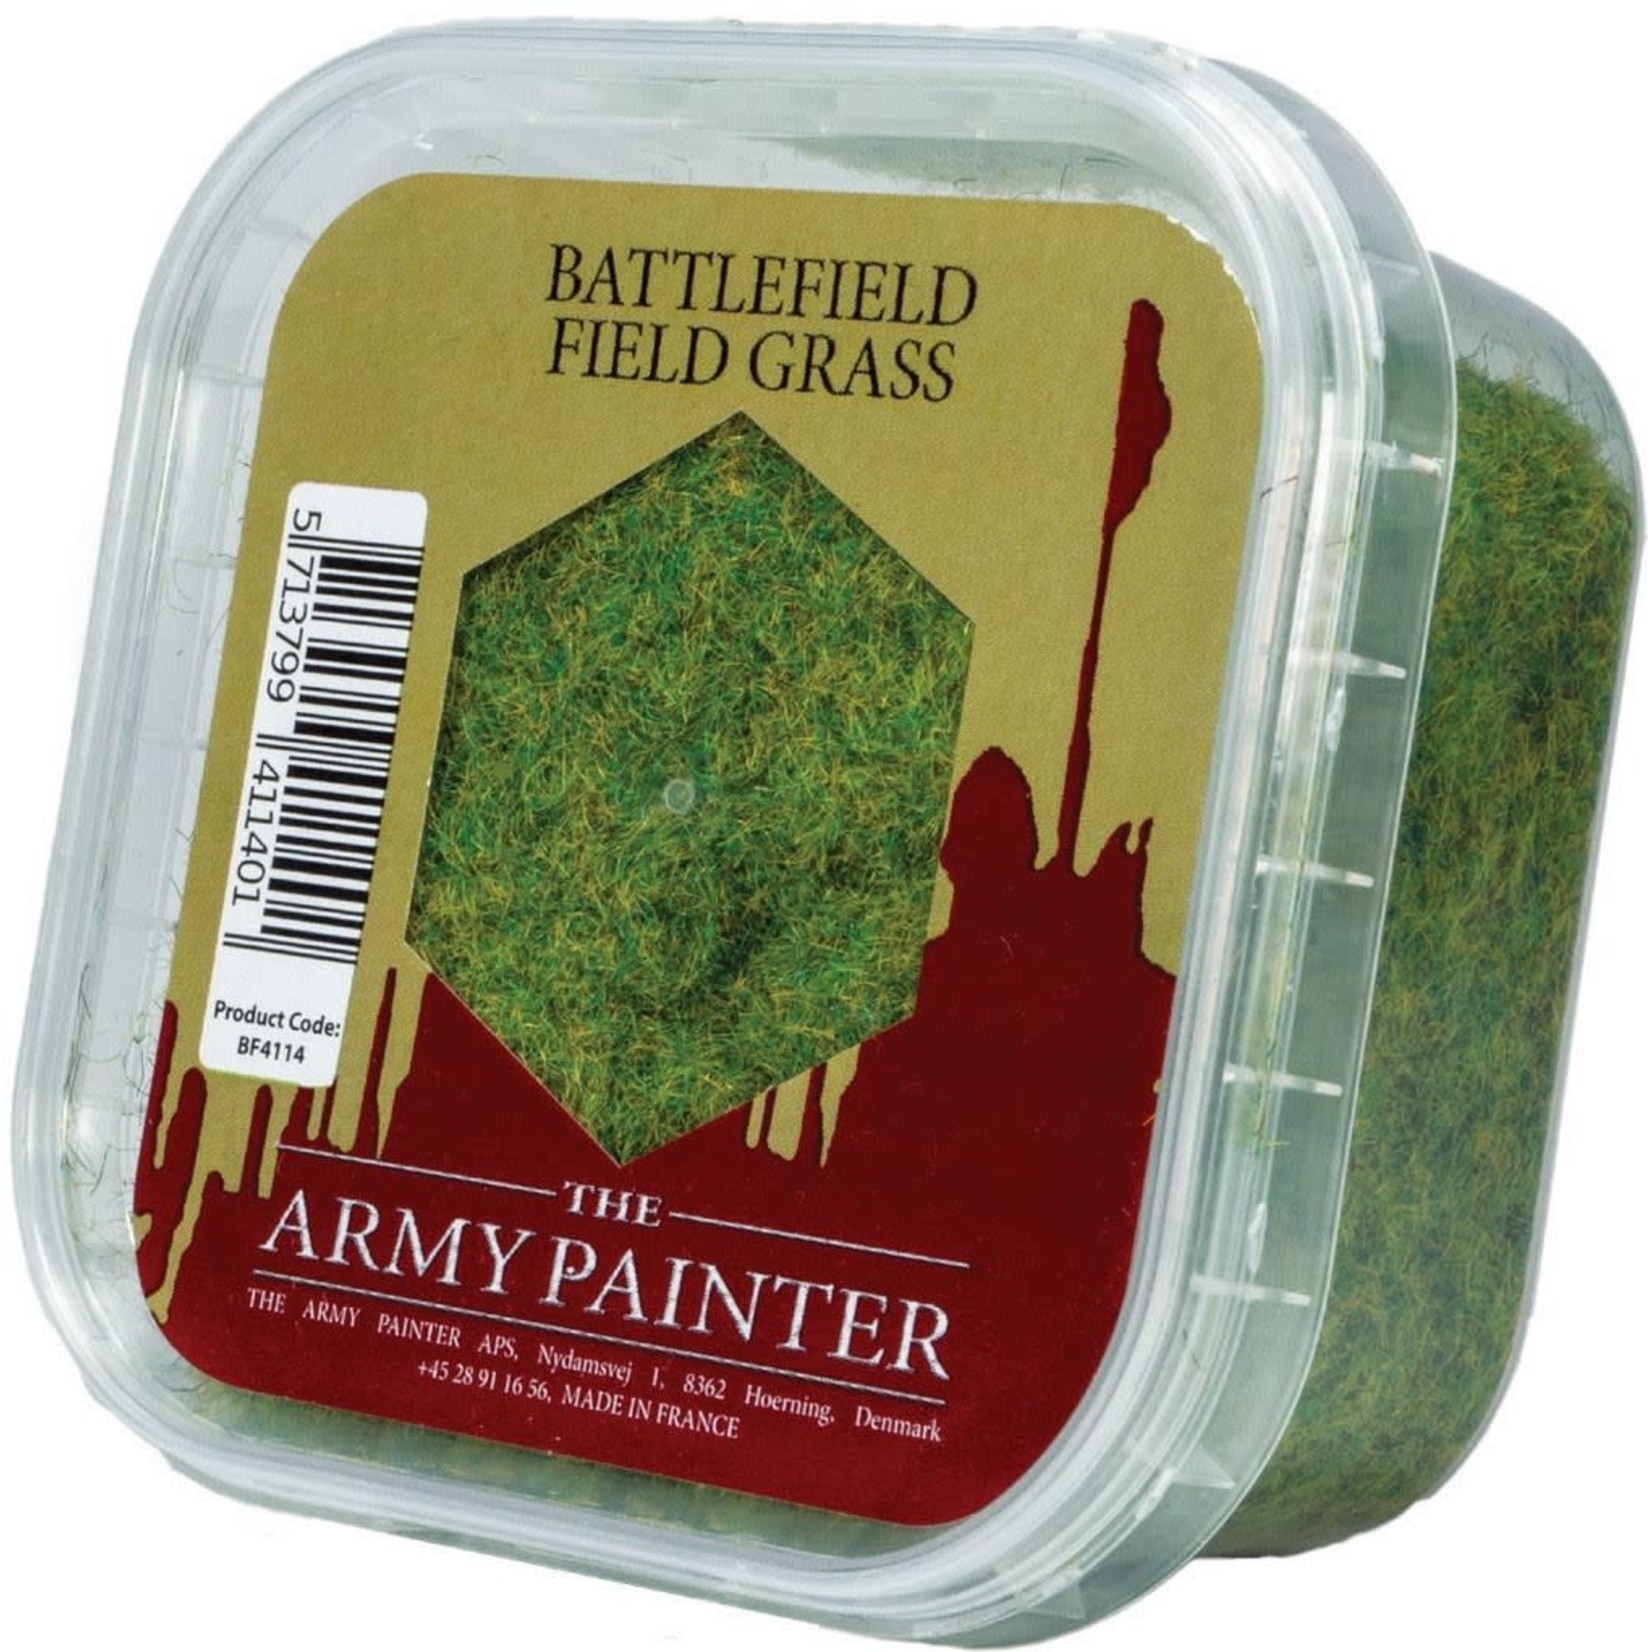 The Army Painter Field Grass